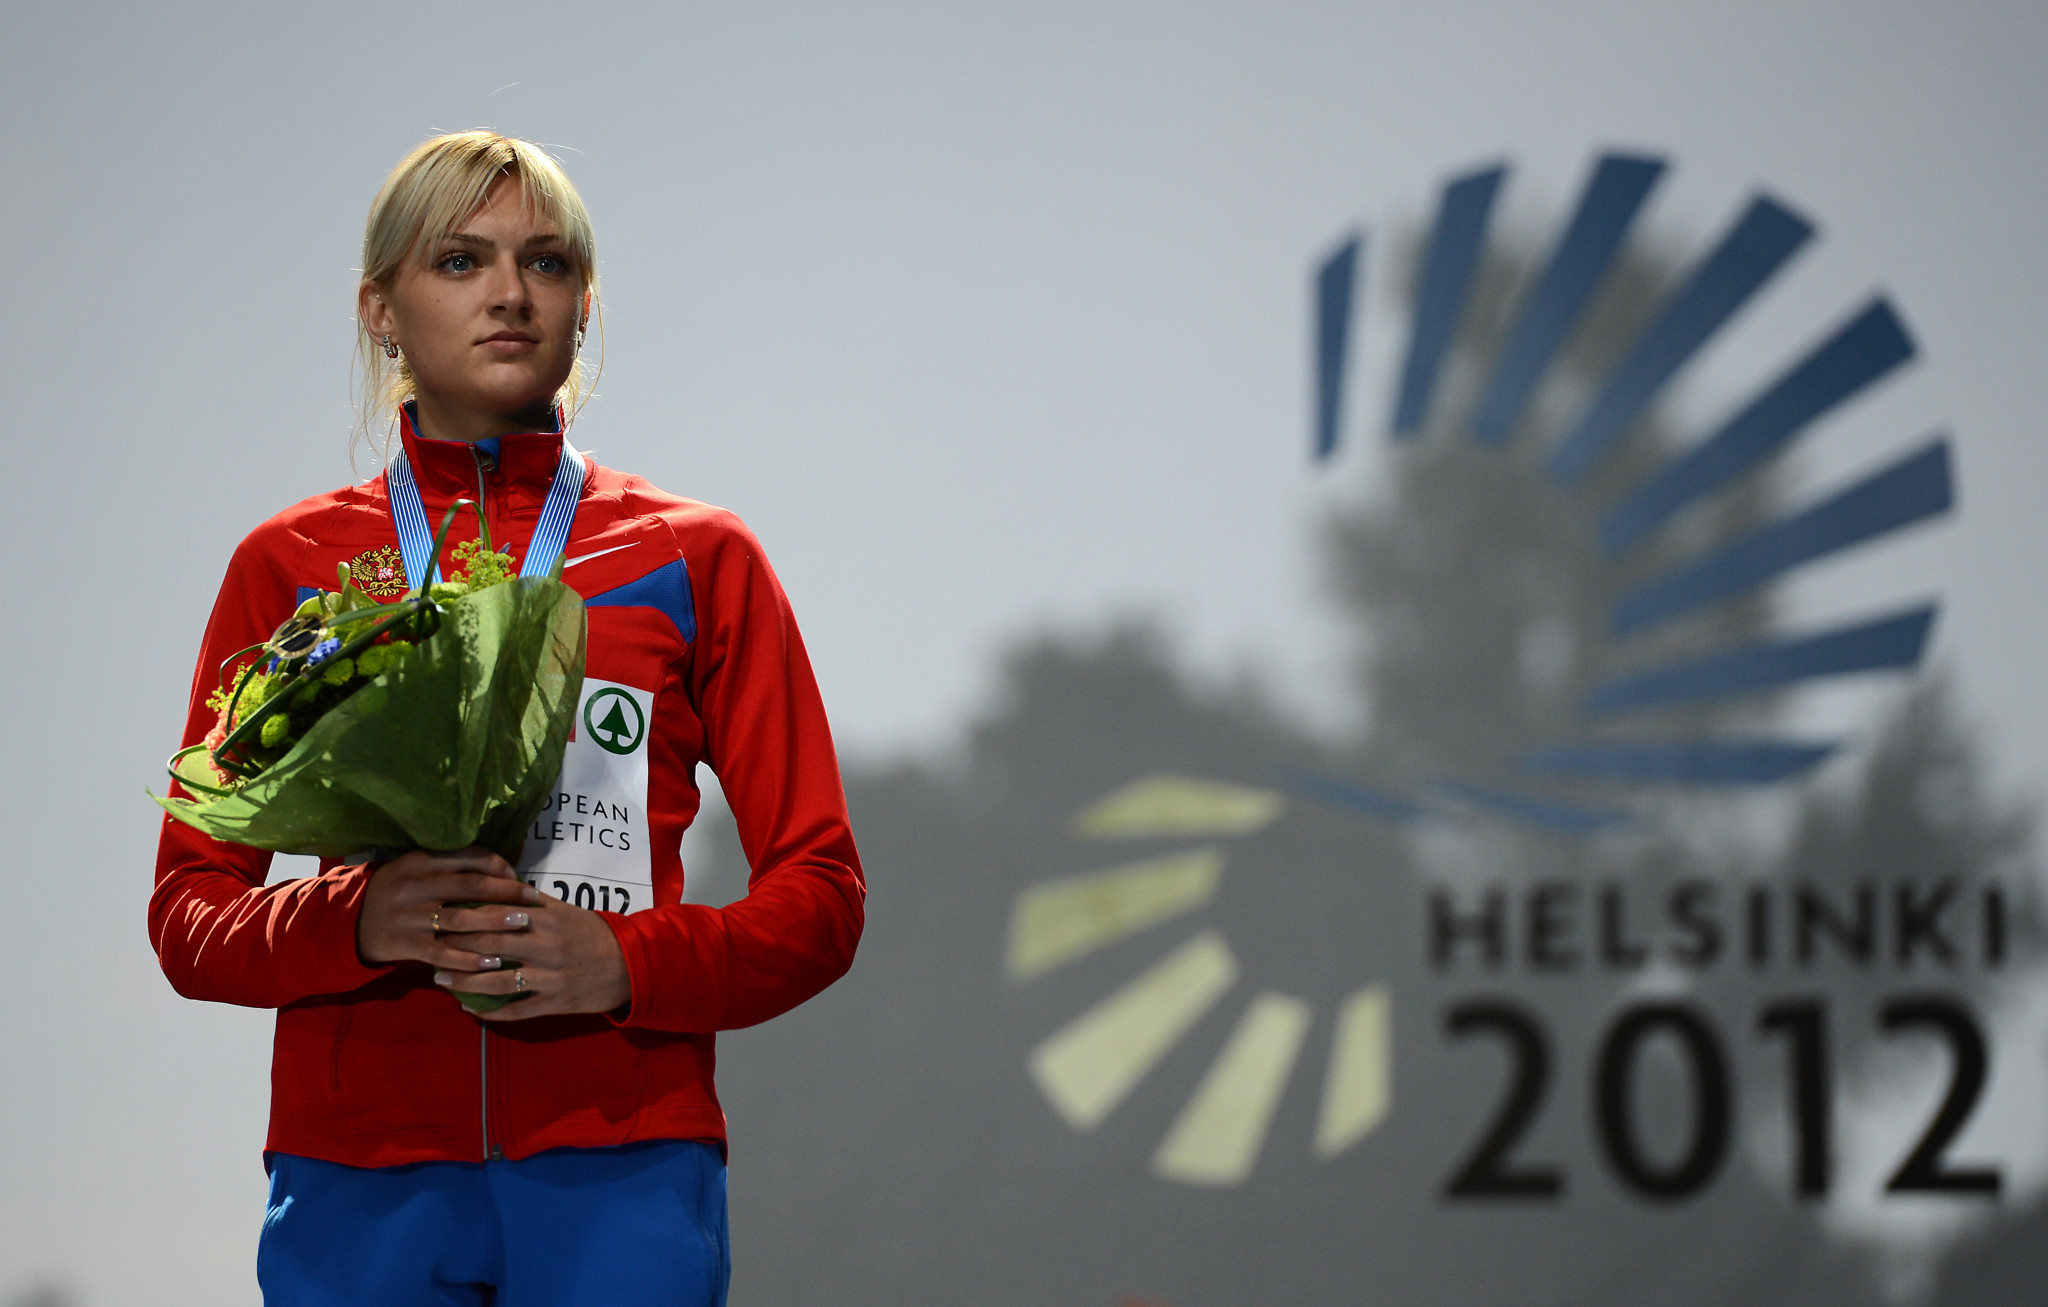 Russia's Irina Davydova will be stripped of the gold medal she won in the 400m hurdles at the 2012 European Championships in Helsinki after being banned for doping ©Getty Images